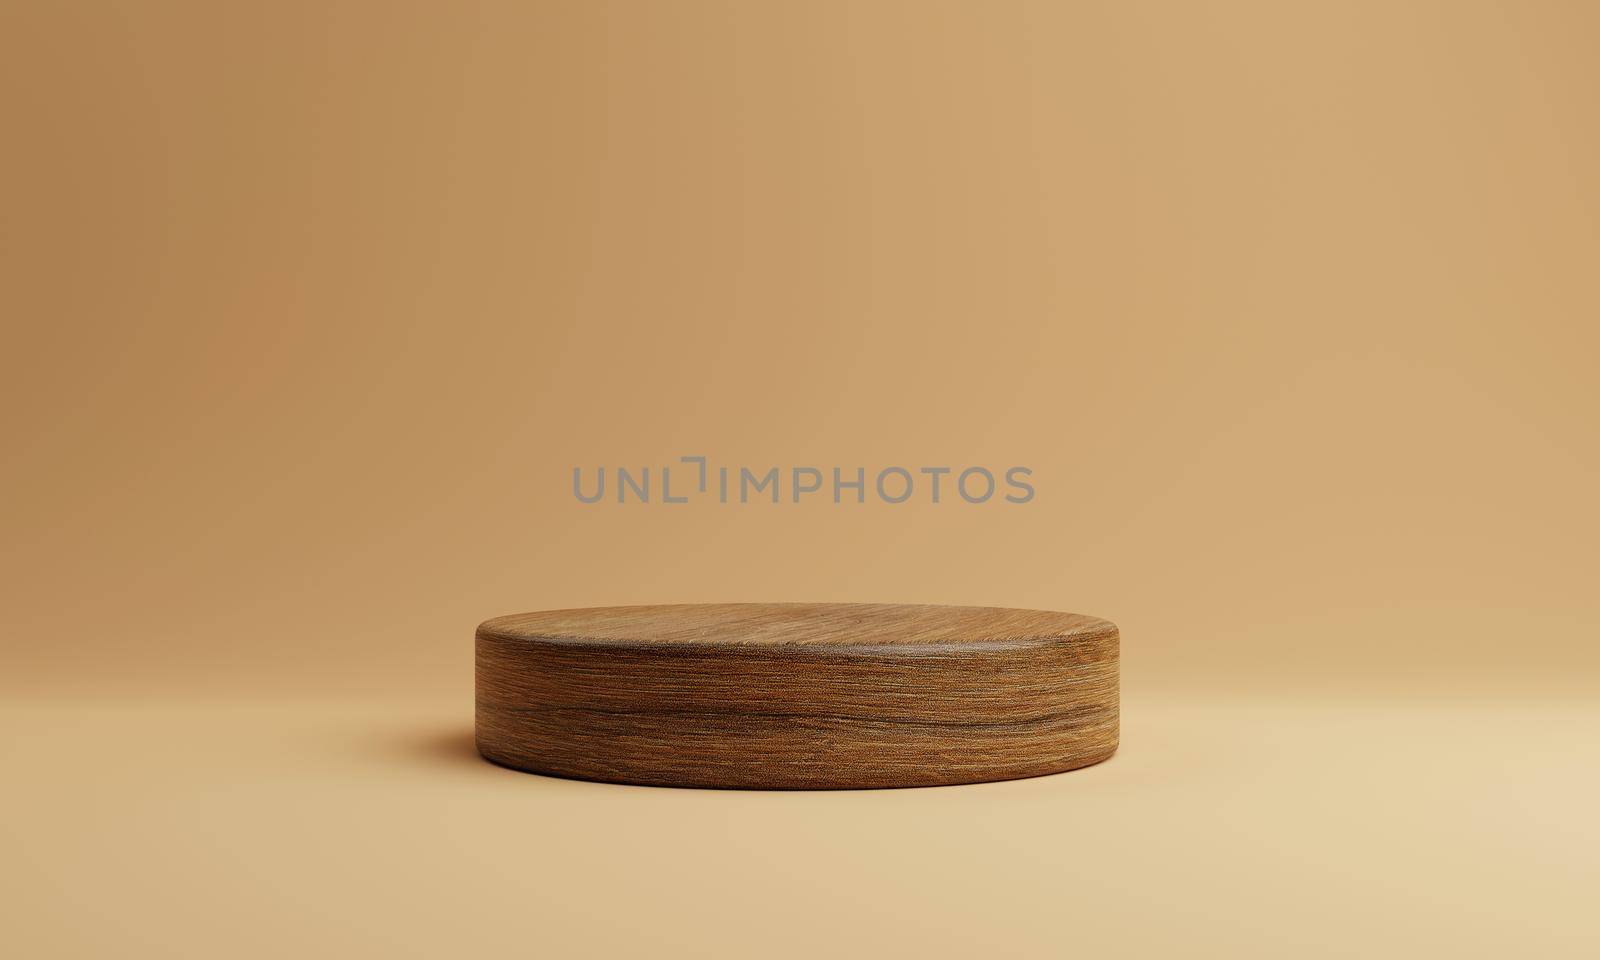 One brown wooden round cylinder product stage podium on orange background. Minimal fashion theme. Geometry exhibition stage mockup concept. 3D illustration rendering graphic design